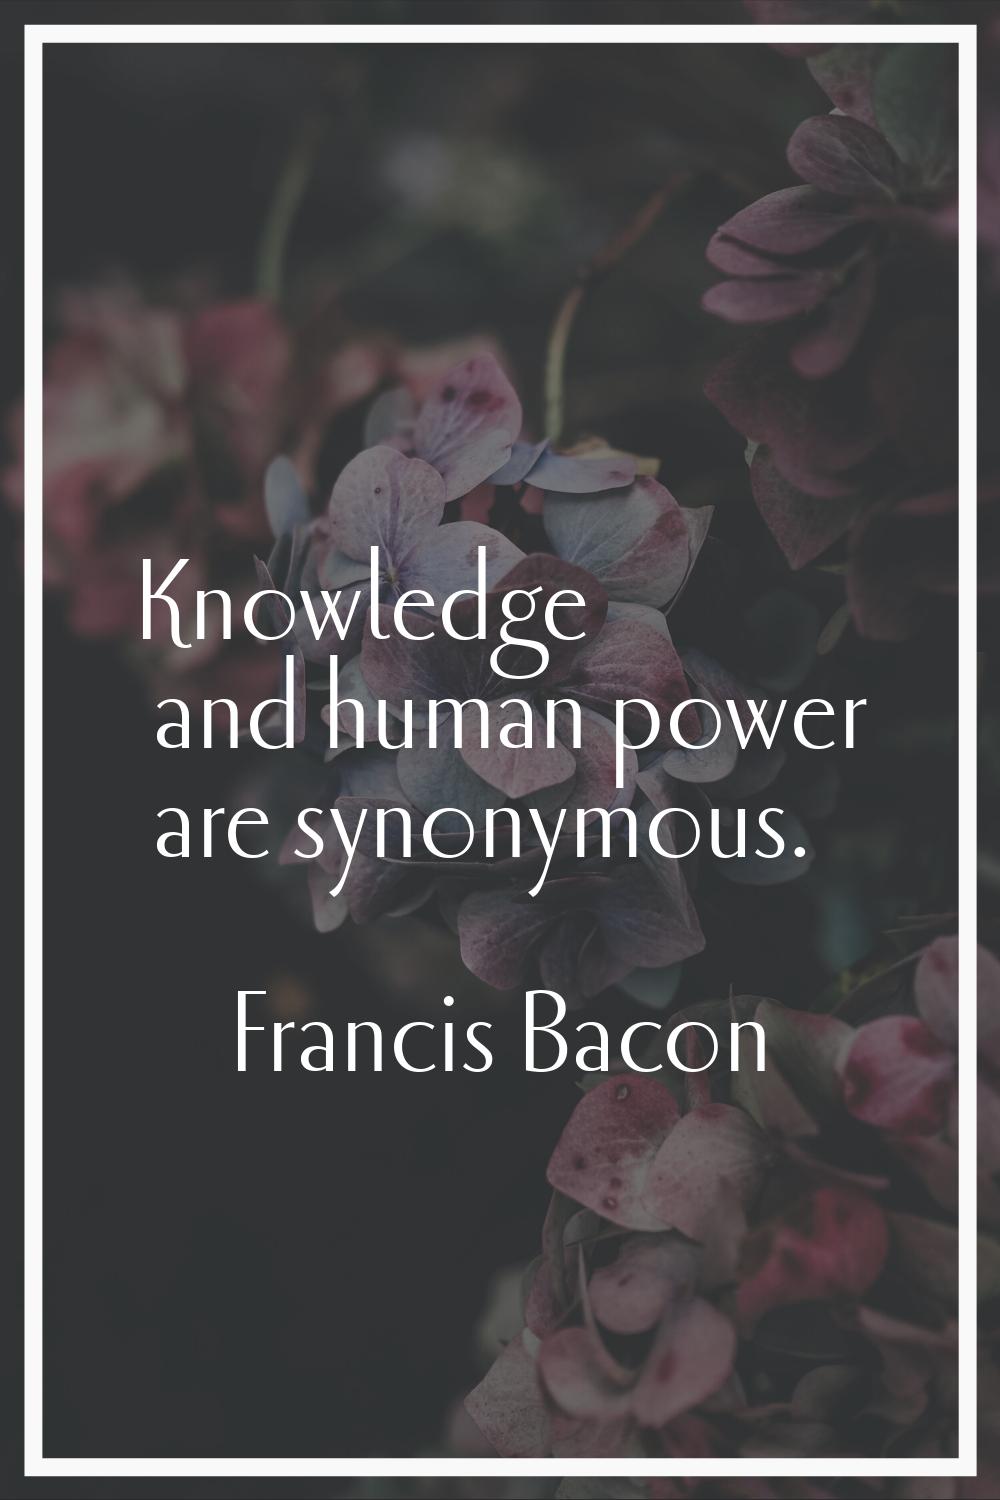 Knowledge and human power are synonymous.